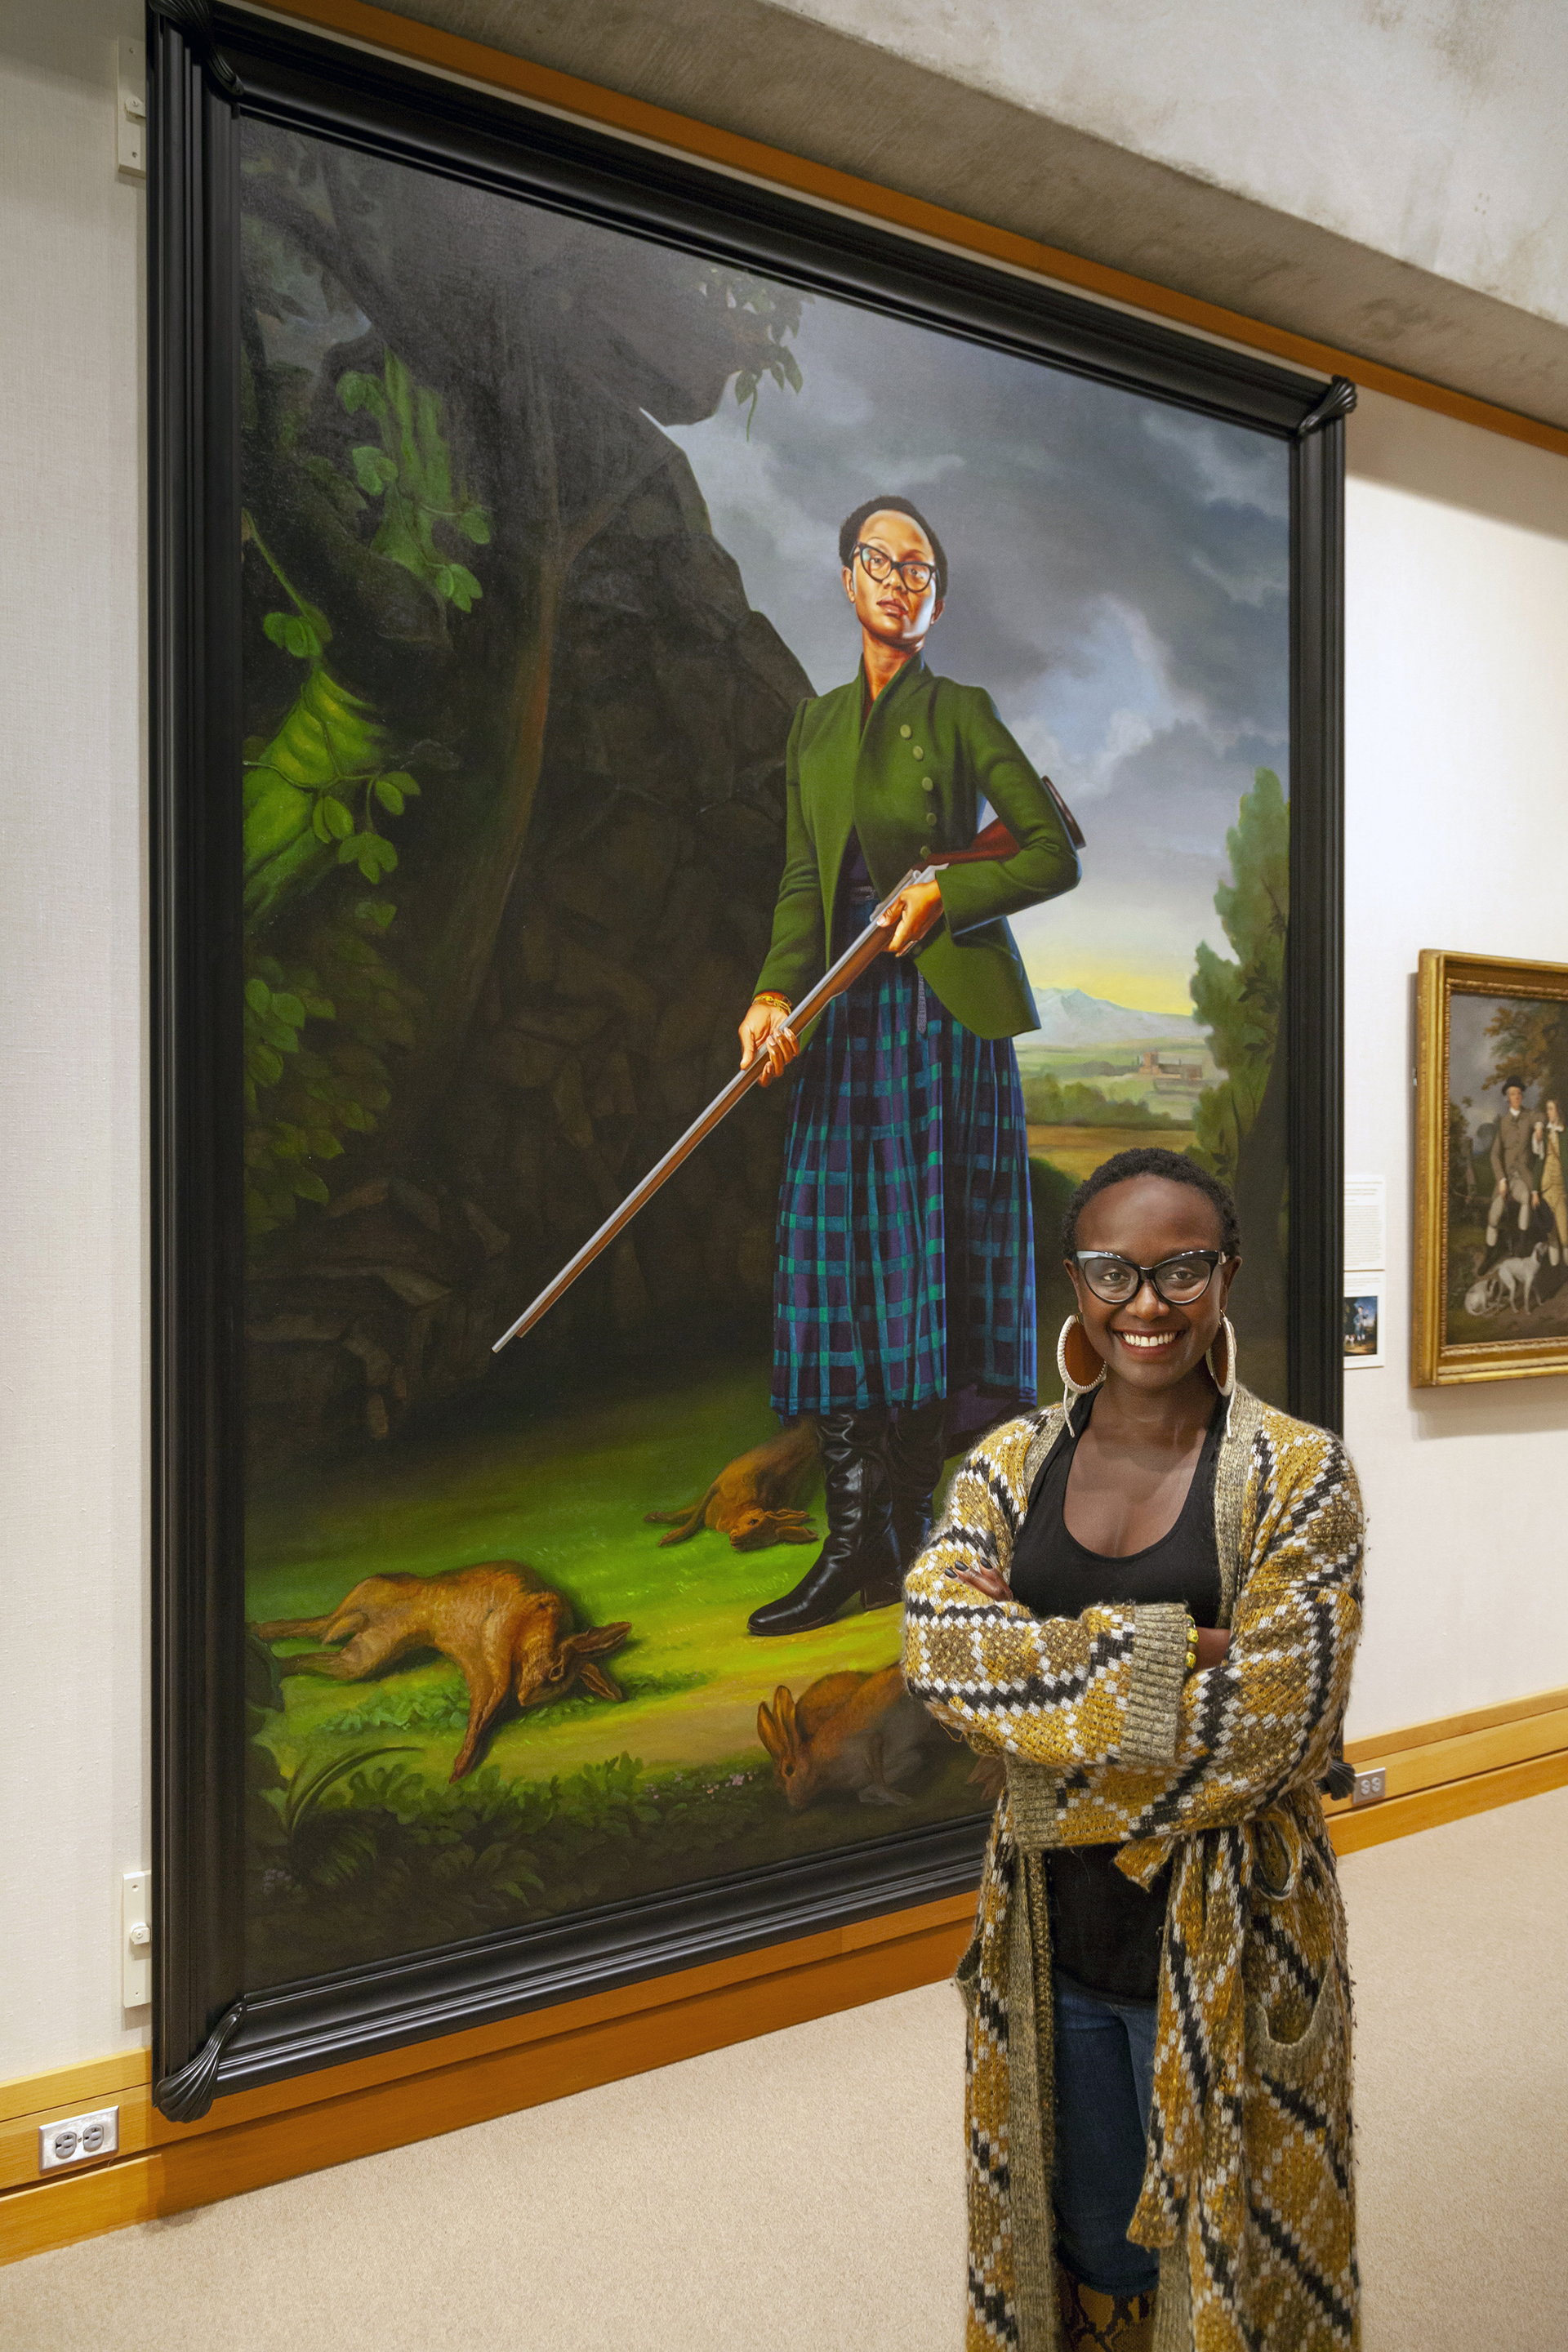 Lynette Yiadom-Boakye stands in front of her portrait by Kehinde Wiley, photo by Harold Shapiro